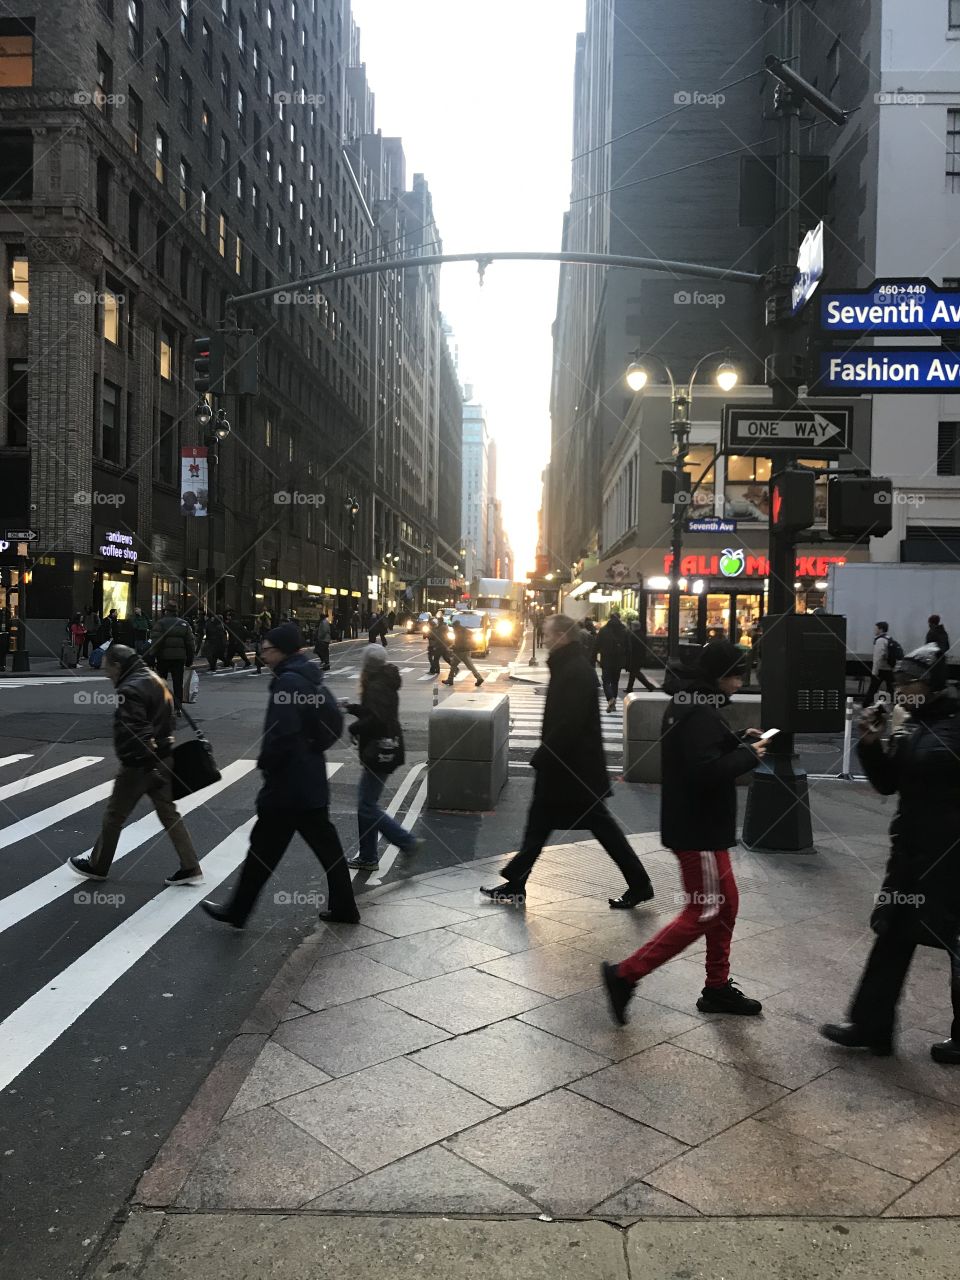 Folks scurrying to work in the early AM, West 35th Street near 7th Avenue.